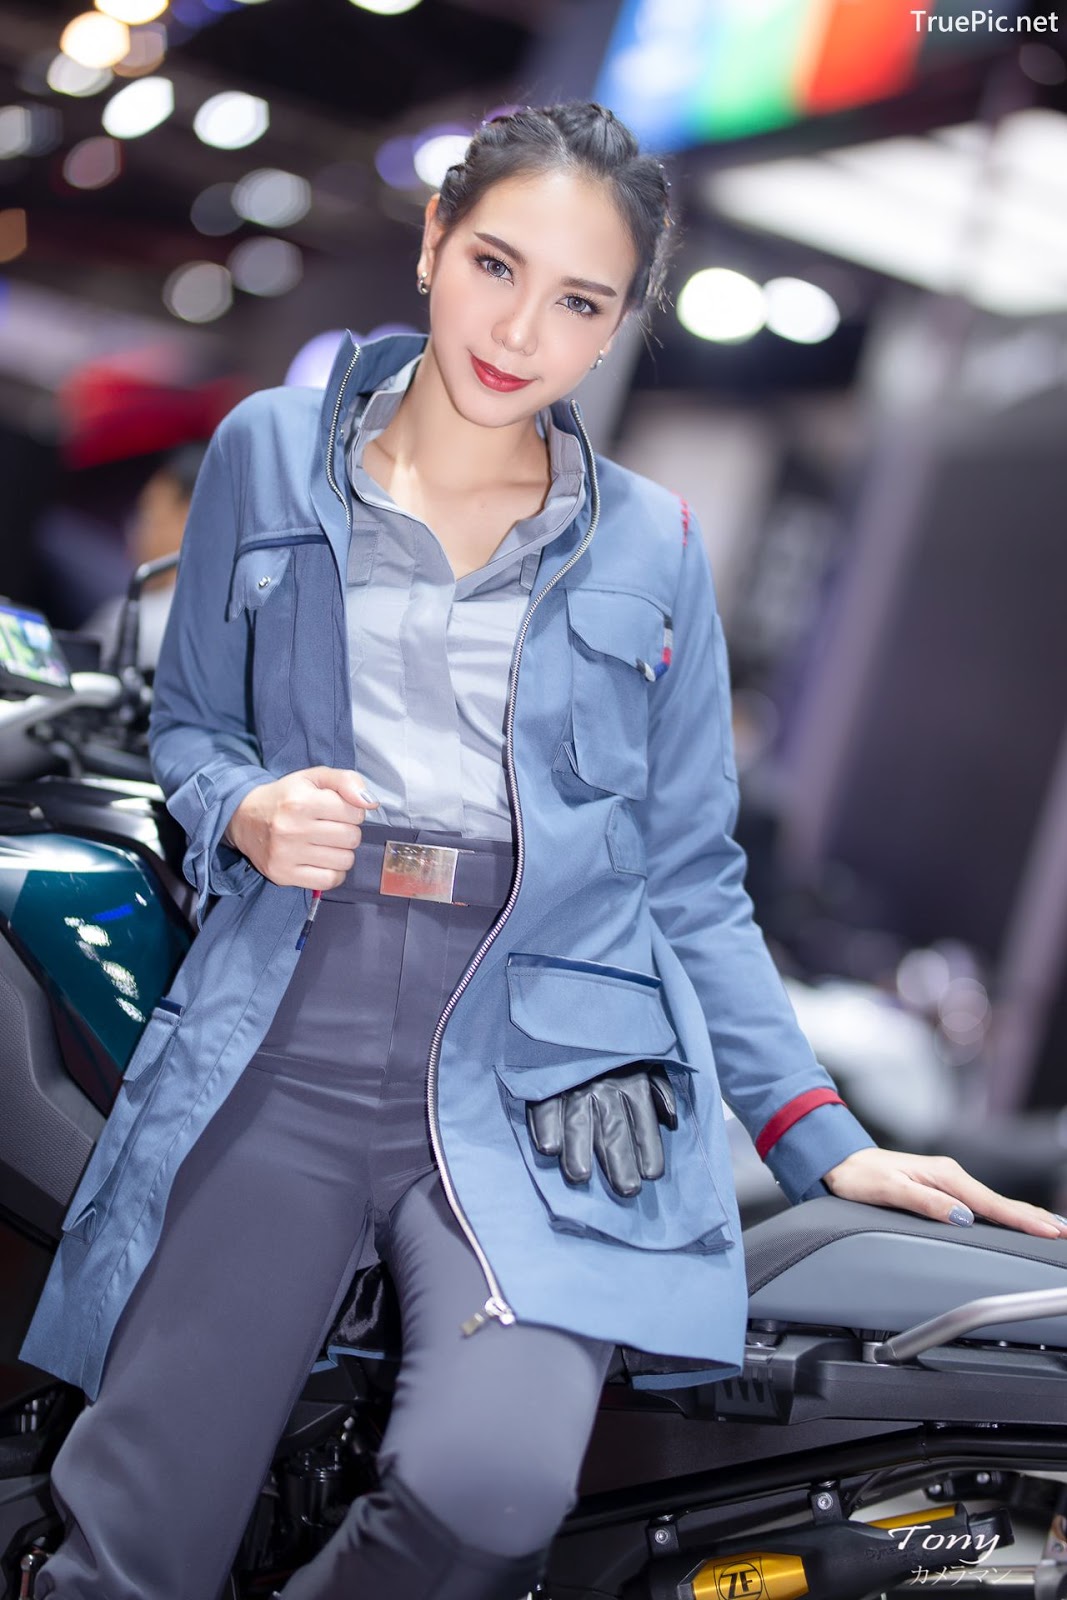 Image-Thailand-Hot-Model-Thai-Racing-Girl-At-Motor-Show-2019-TruePic.net- Picture-19